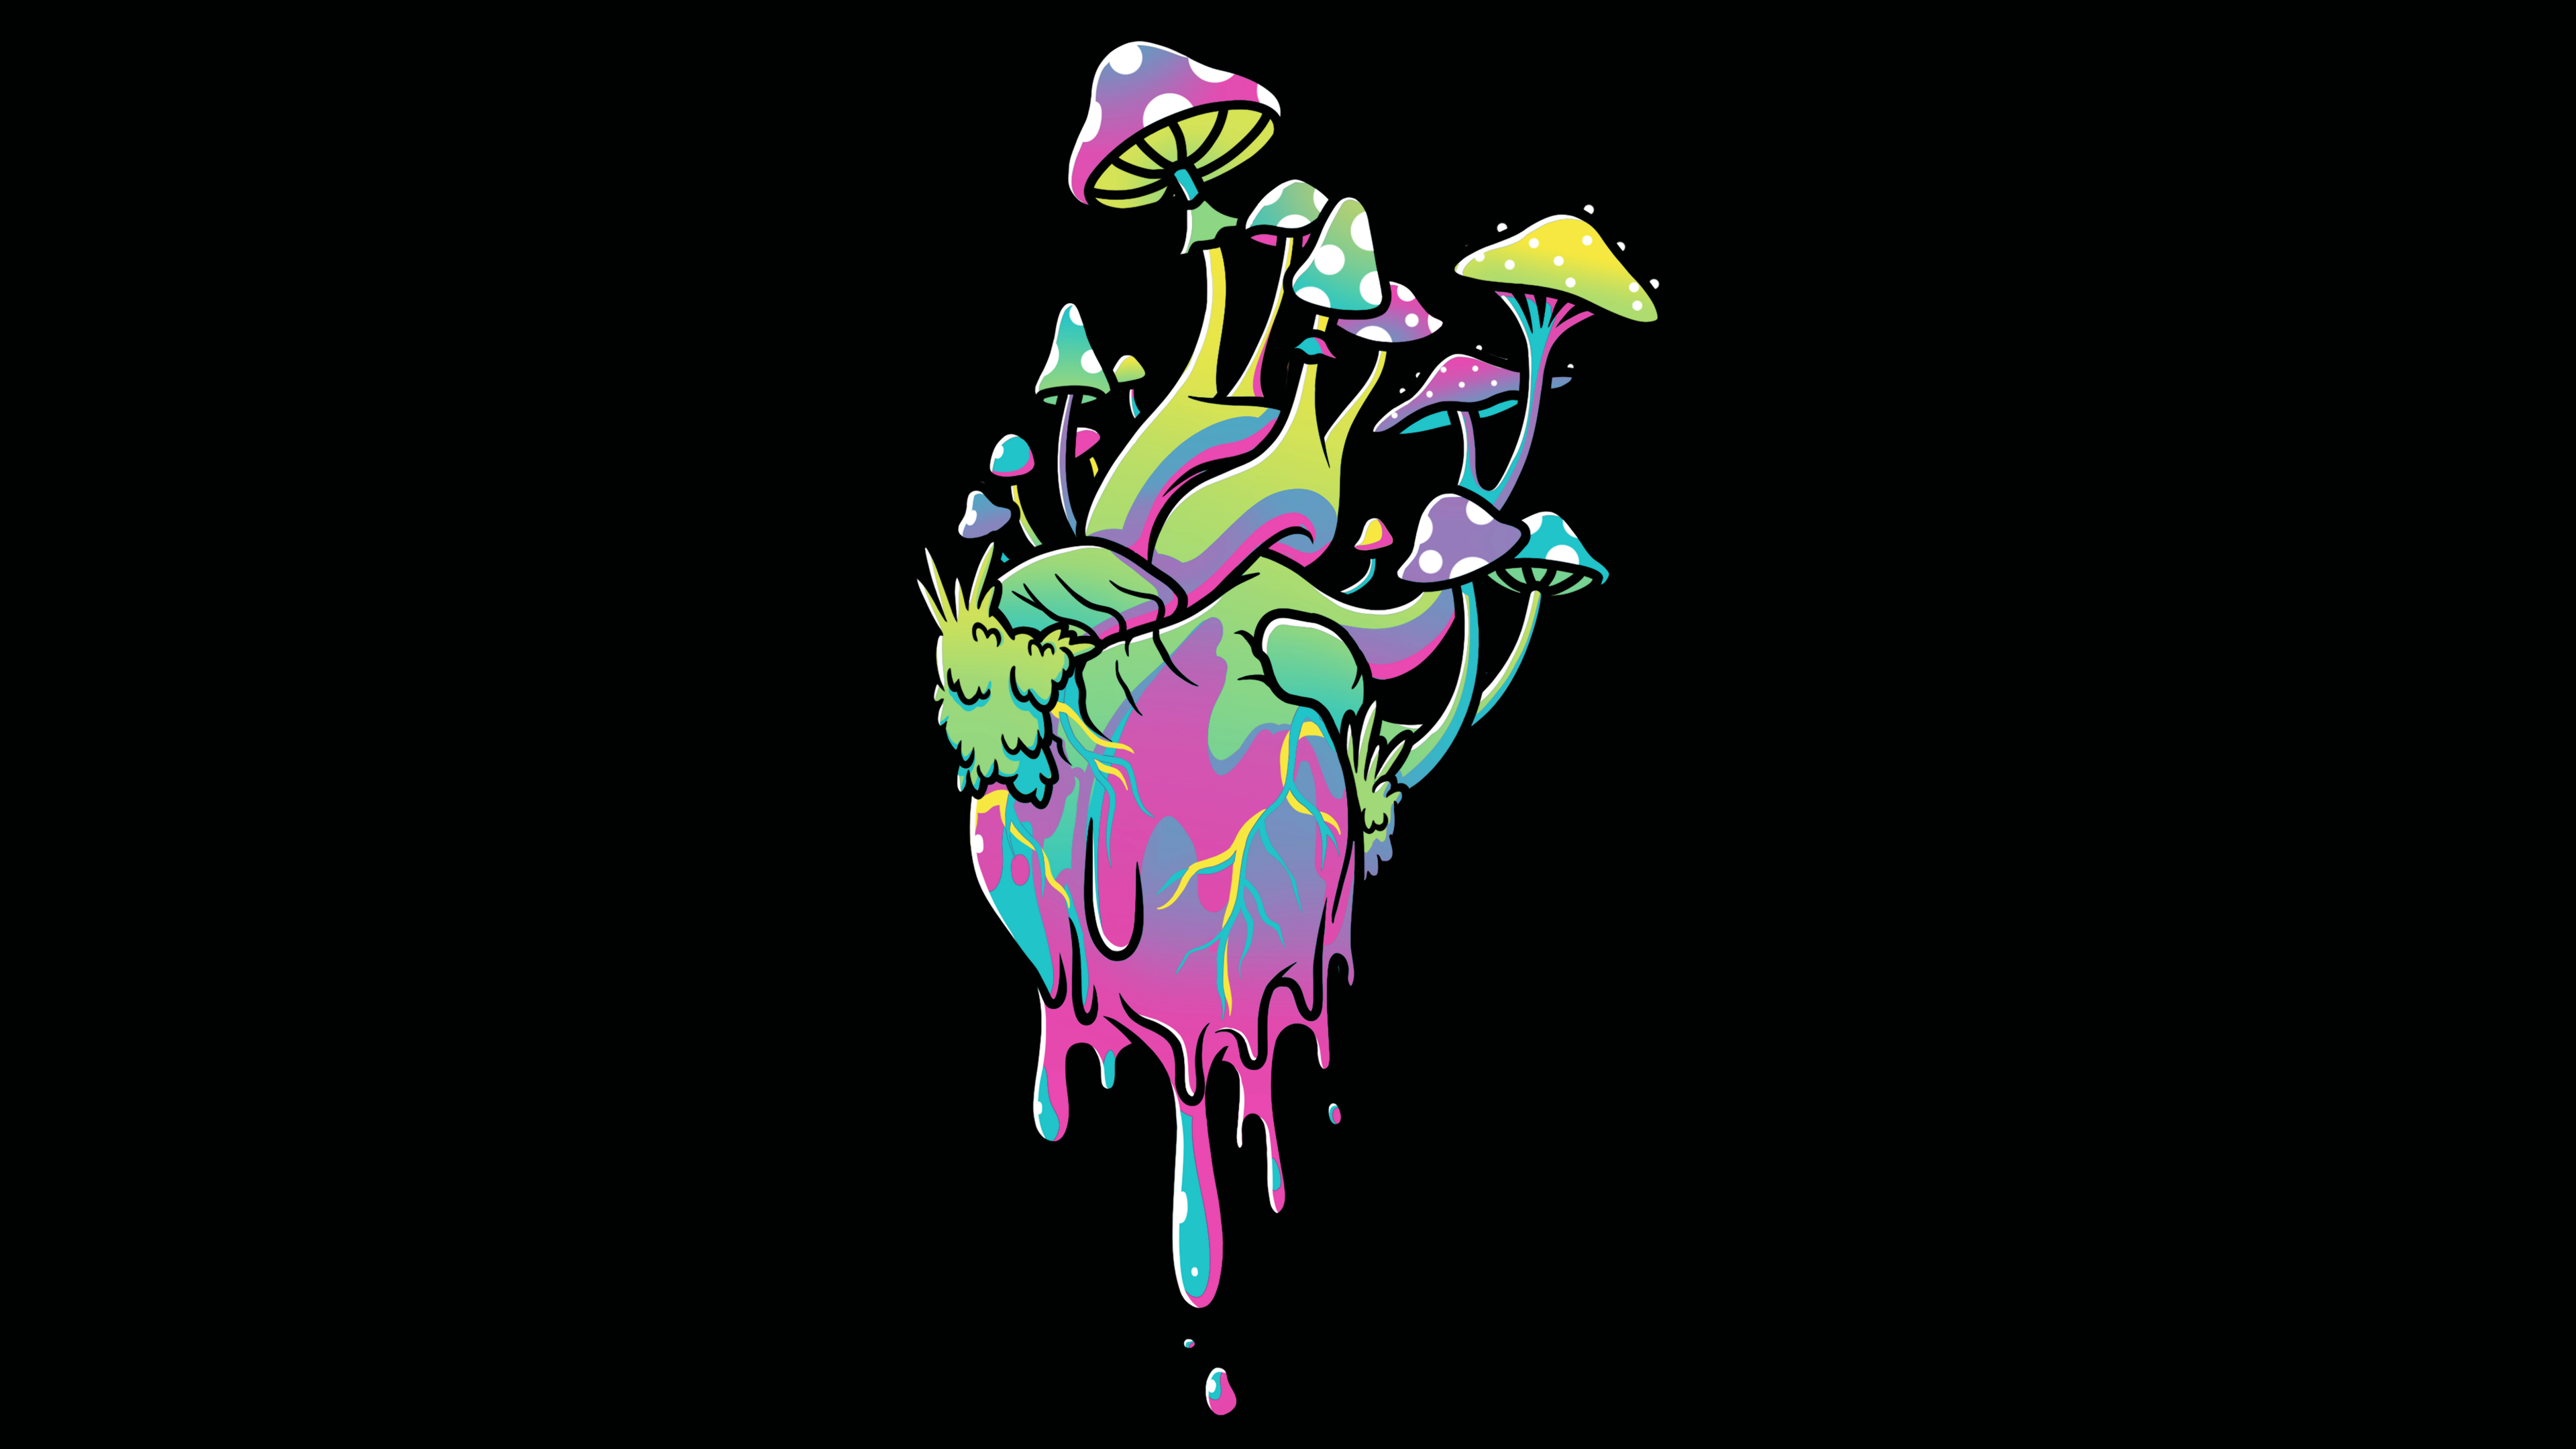 Heart Psychedelic 3840x2160 11084 